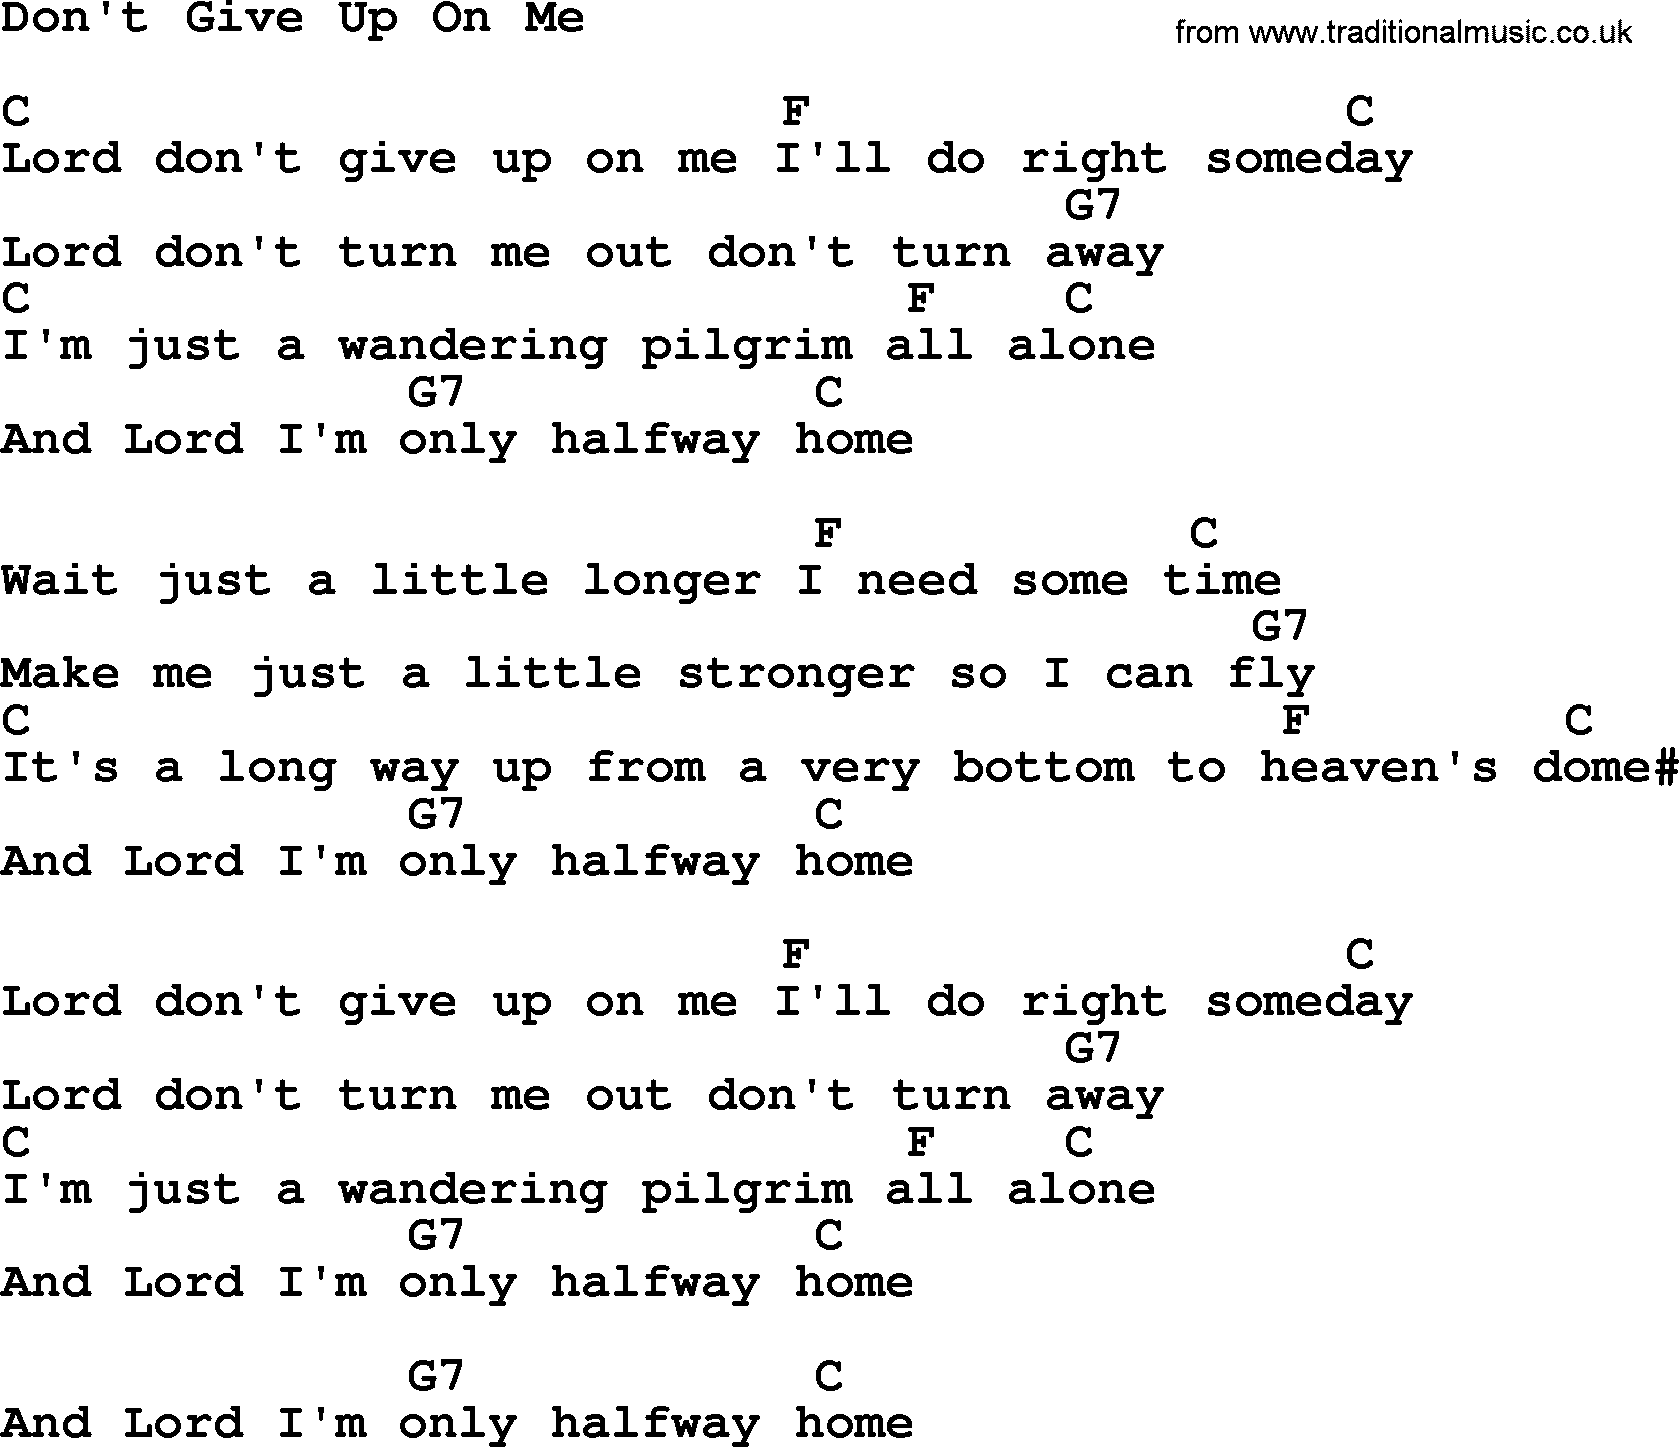 Merle Haggard song: Don't Give Up On Me, lyrics and chords